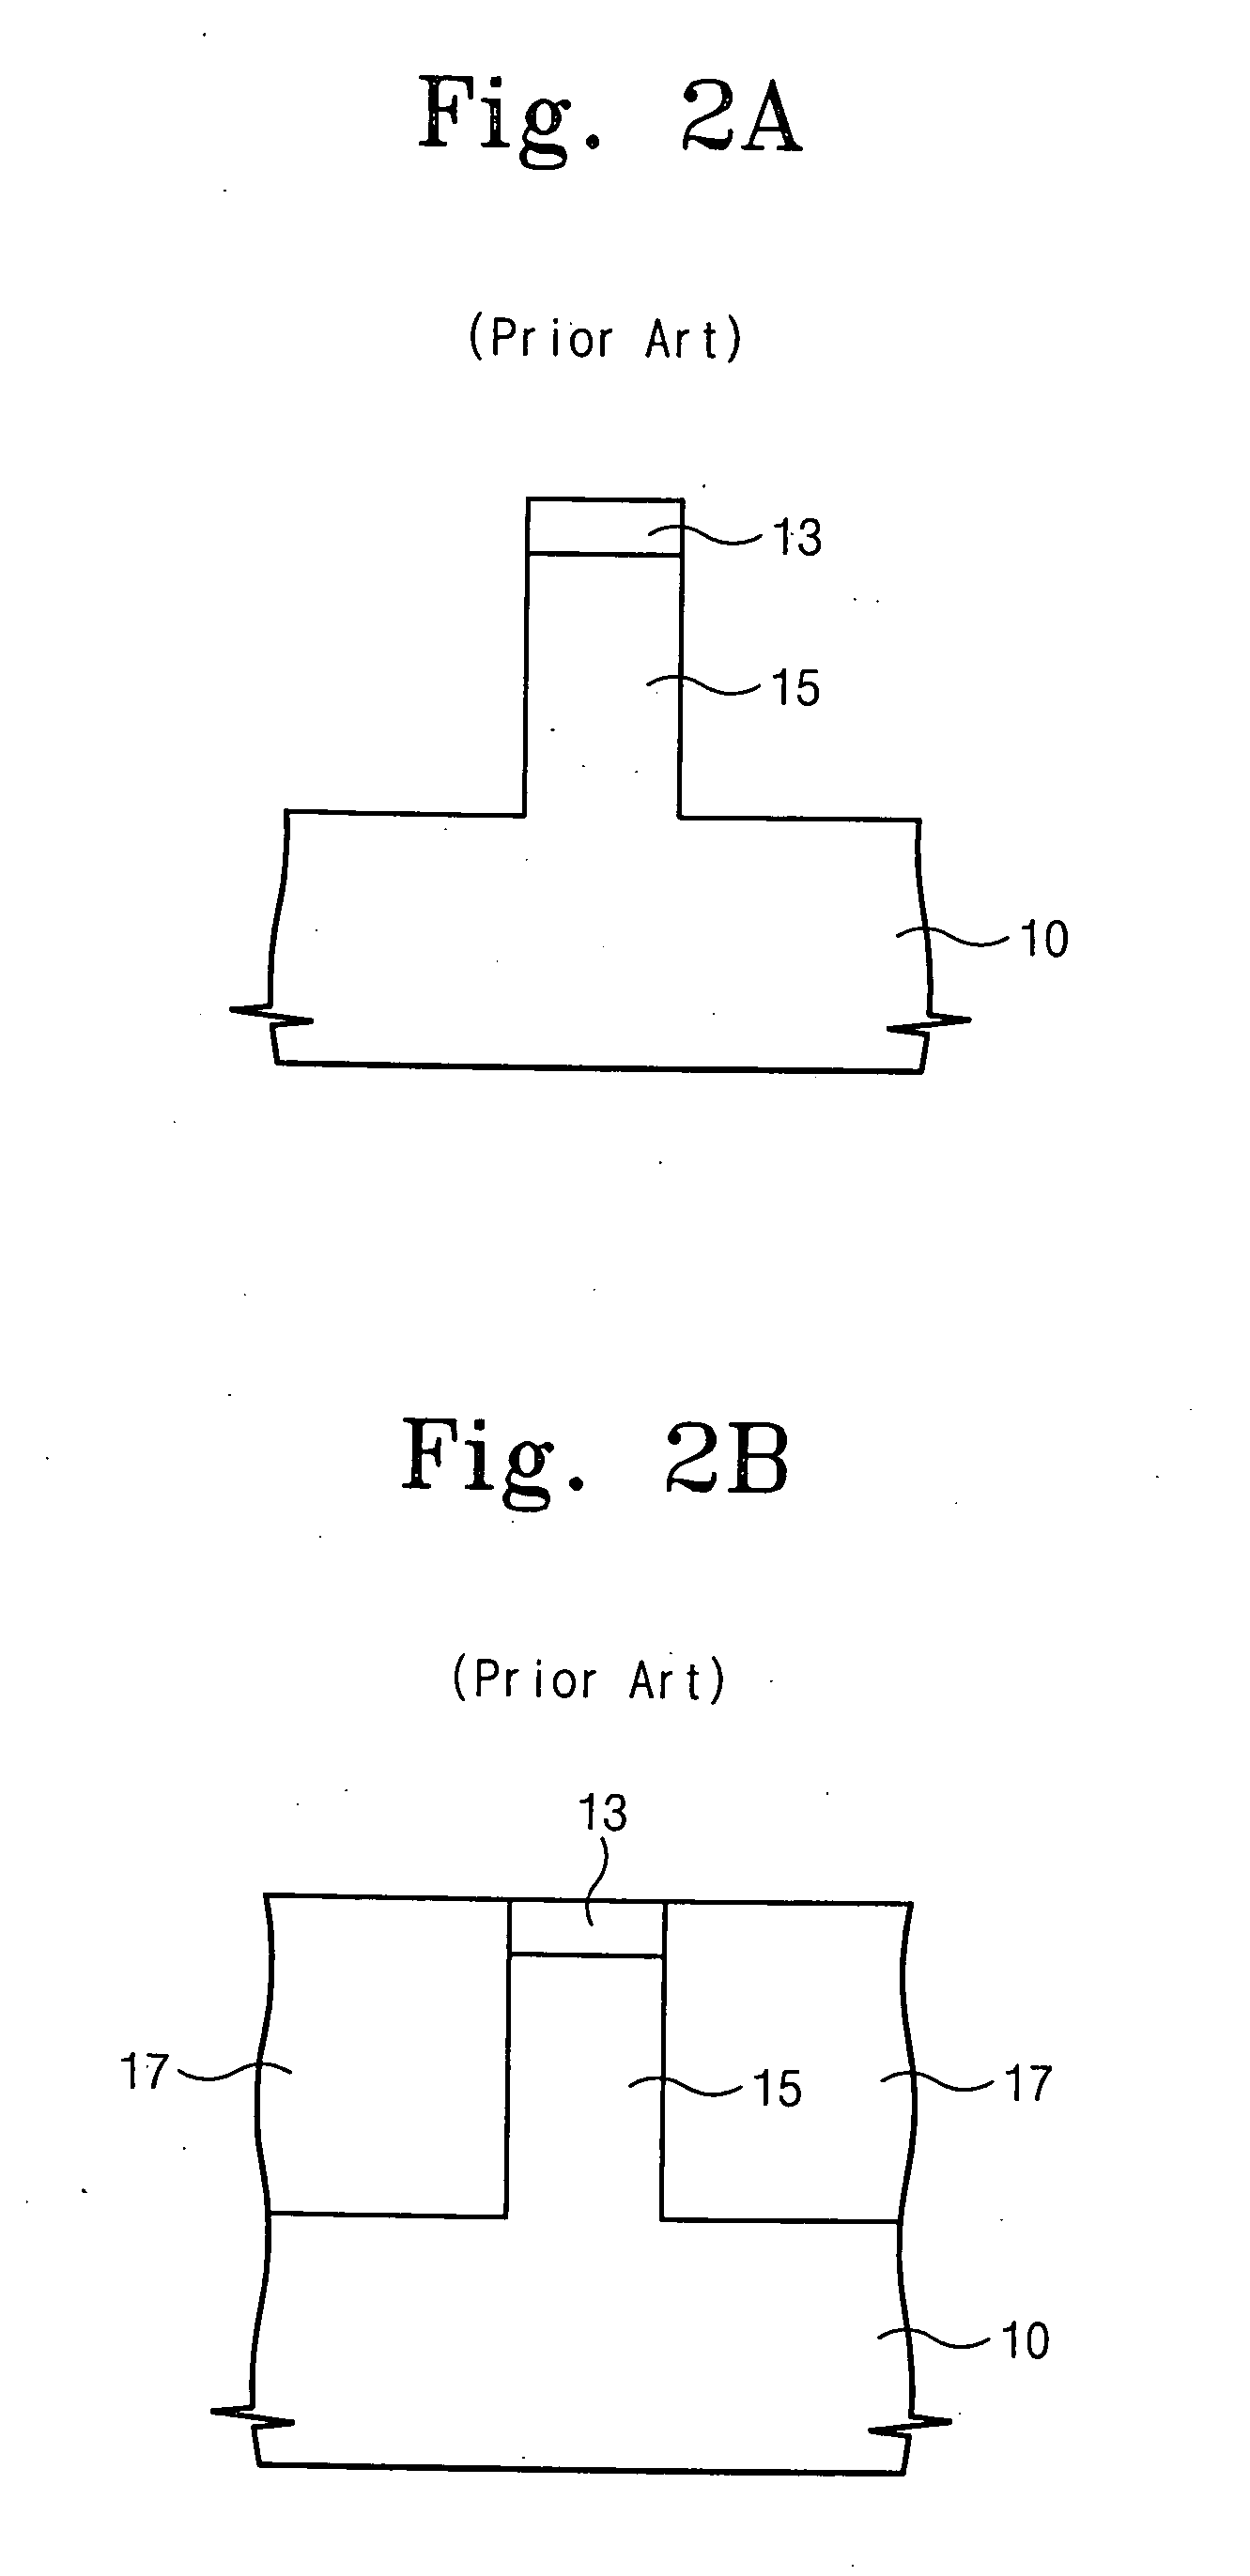 Methods of forming non-volatile semiconductor memory devices using prominences and trenches, and devices so formed